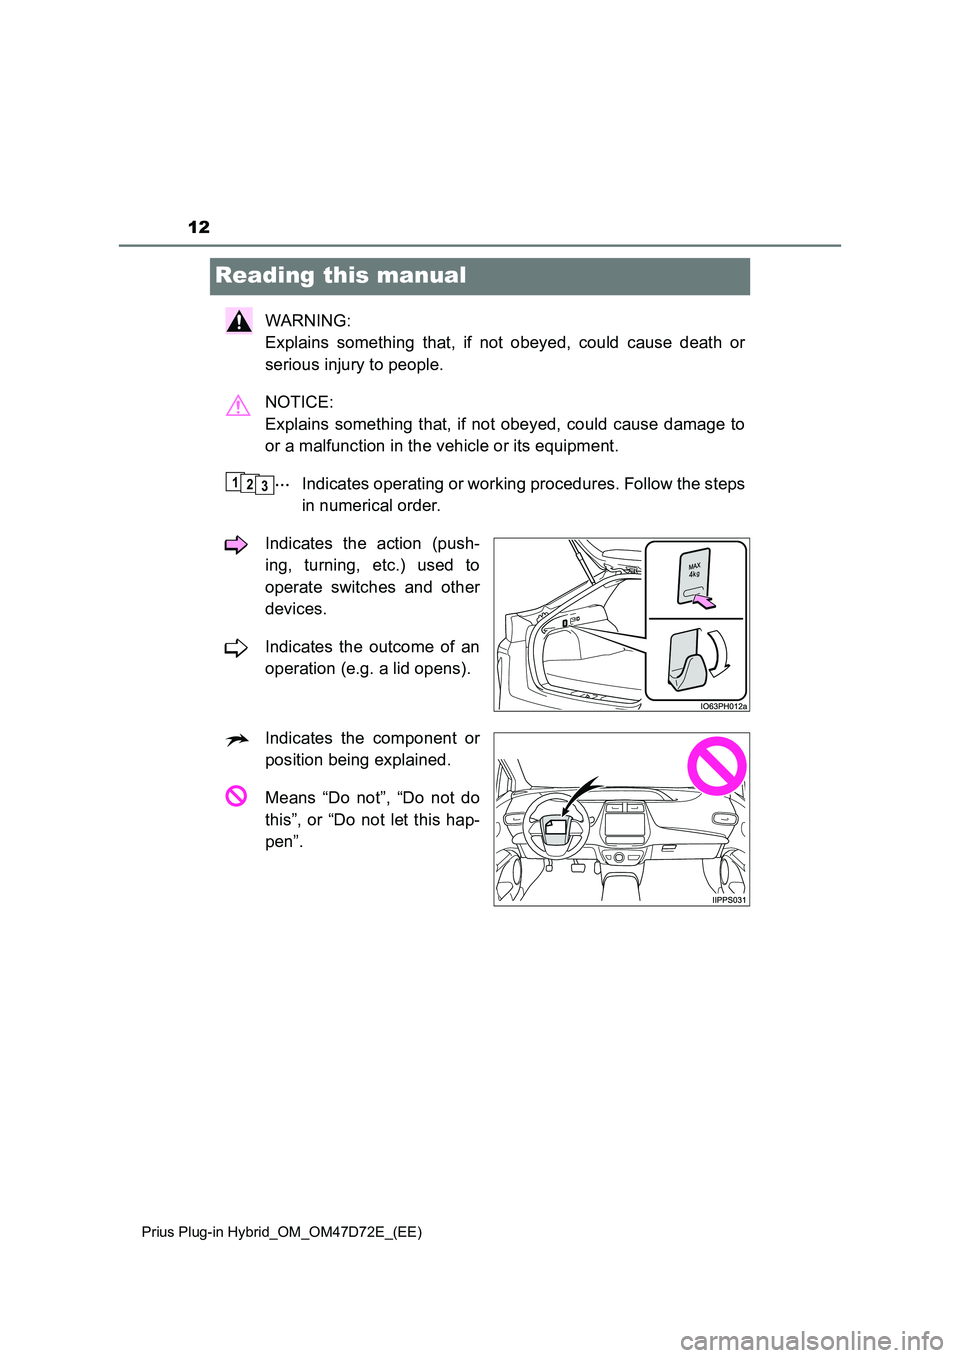 TOYOTA PRIUS PLUG-IN HYBRID 2021  Owners Manual 12
Prius Plug-in Hybrid_OM_OM47D72E_(EE)
Reading this manual
WARNING:  
Explains something that, if not obeyed, could cause death or 
serious injury to people. 
NOTICE:  
Explains something that, if n